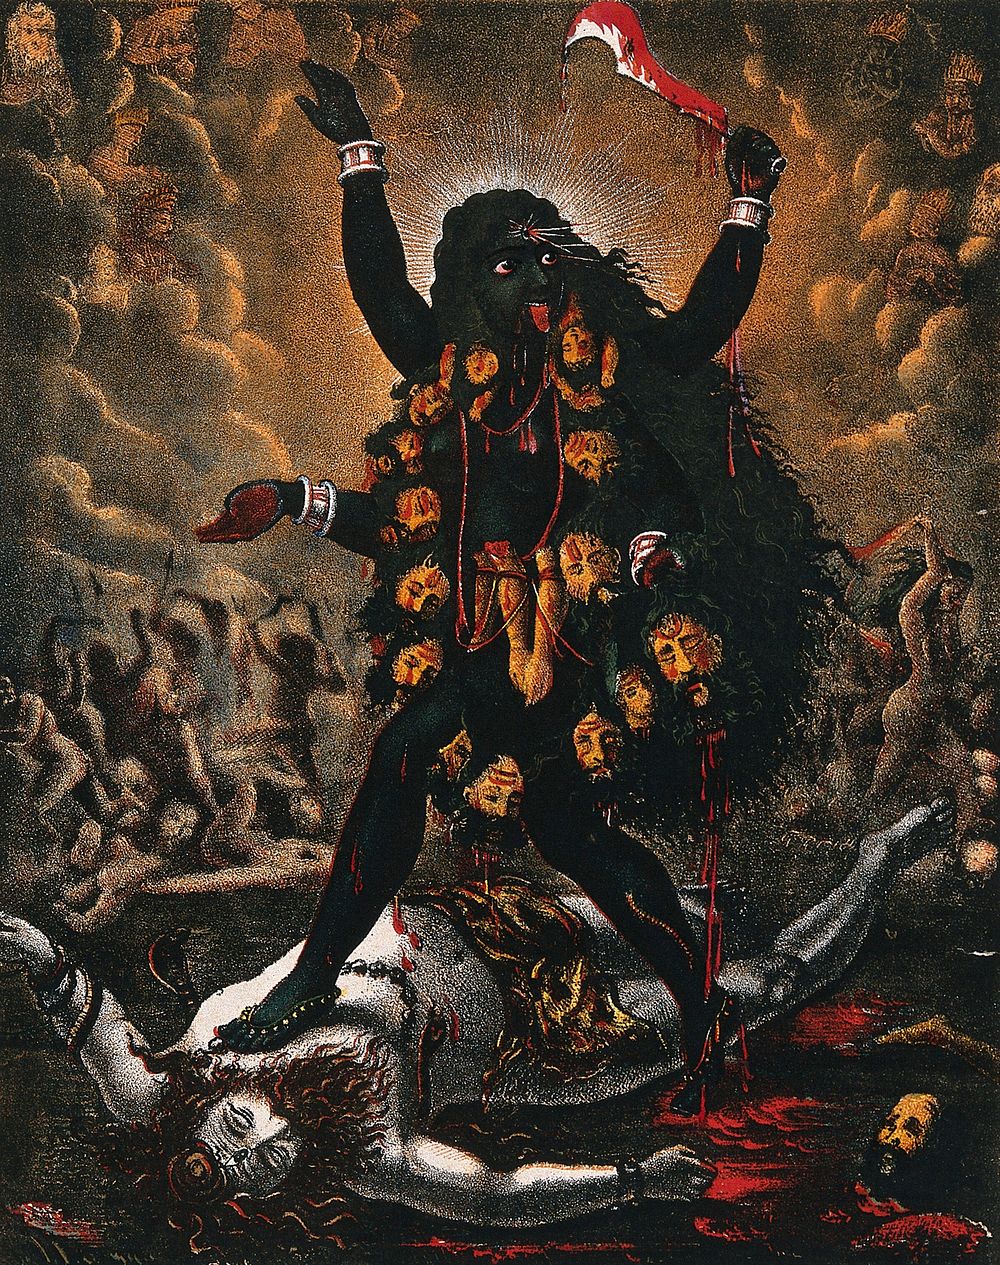 Kali standing triumphantly over Shiva's corpse. Chromolithograph.